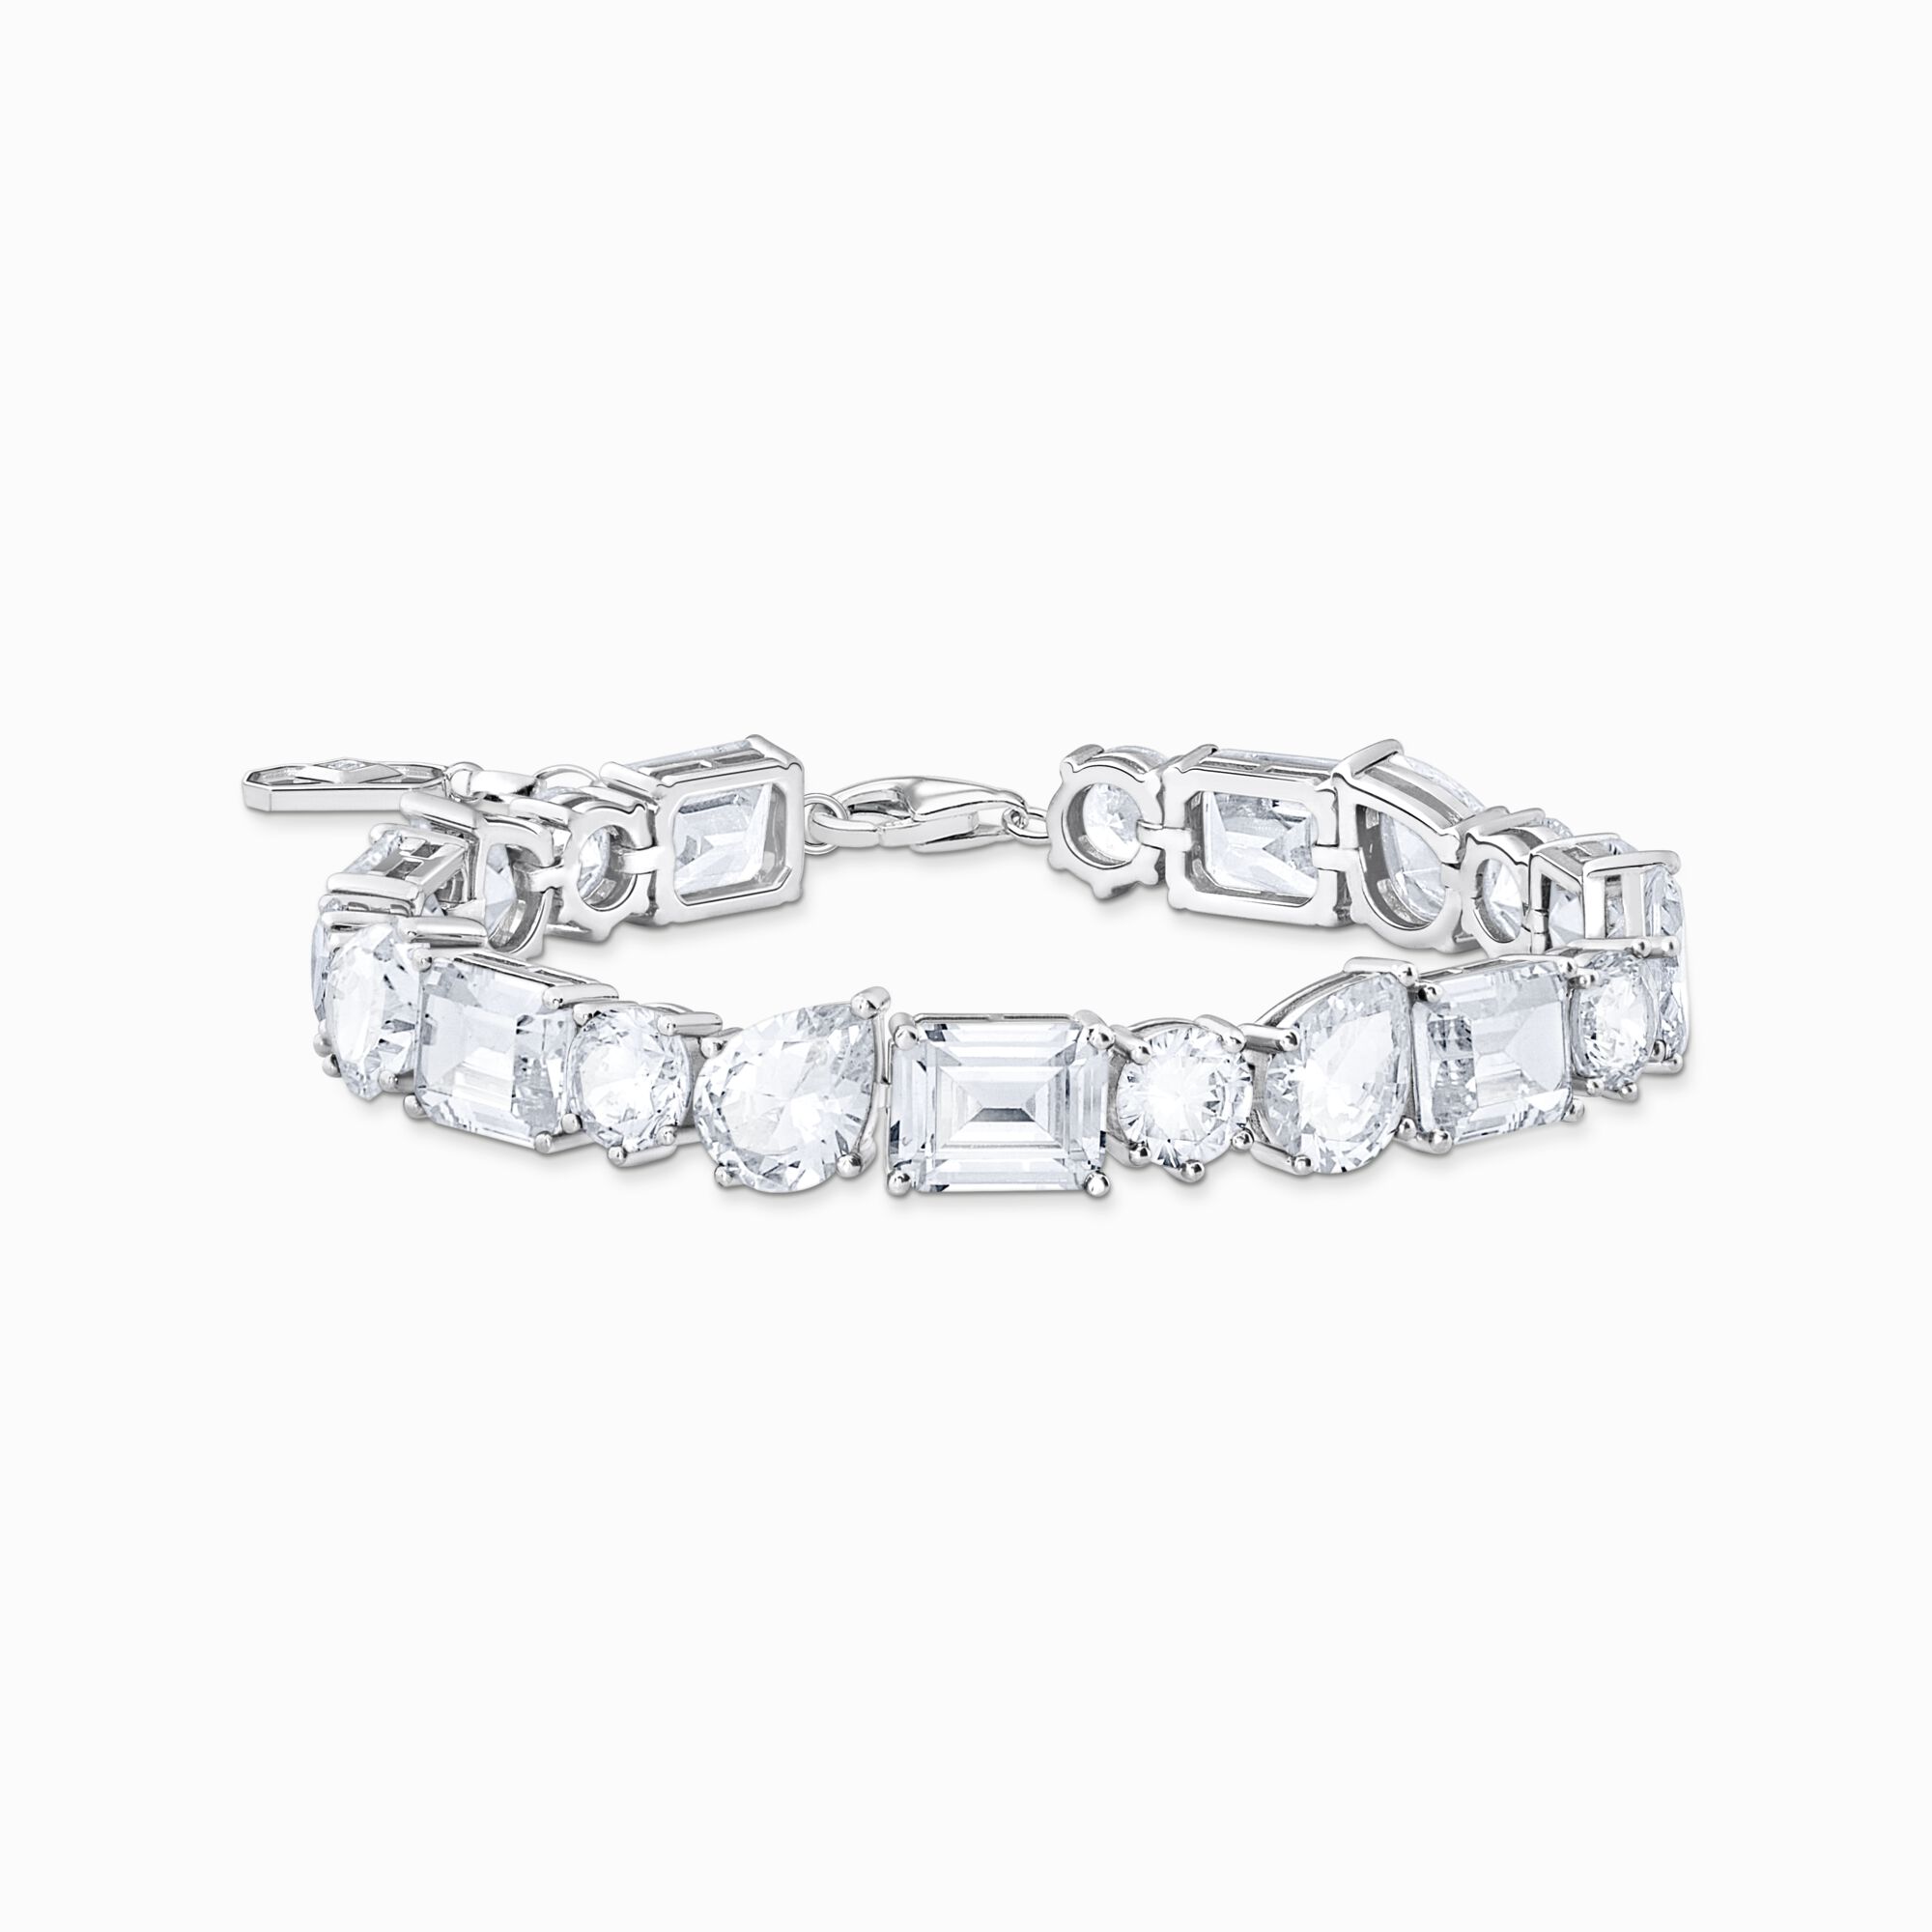 Silver tennis bracelet with 20 white zirconia stones from the  collection in the THOMAS SABO online store